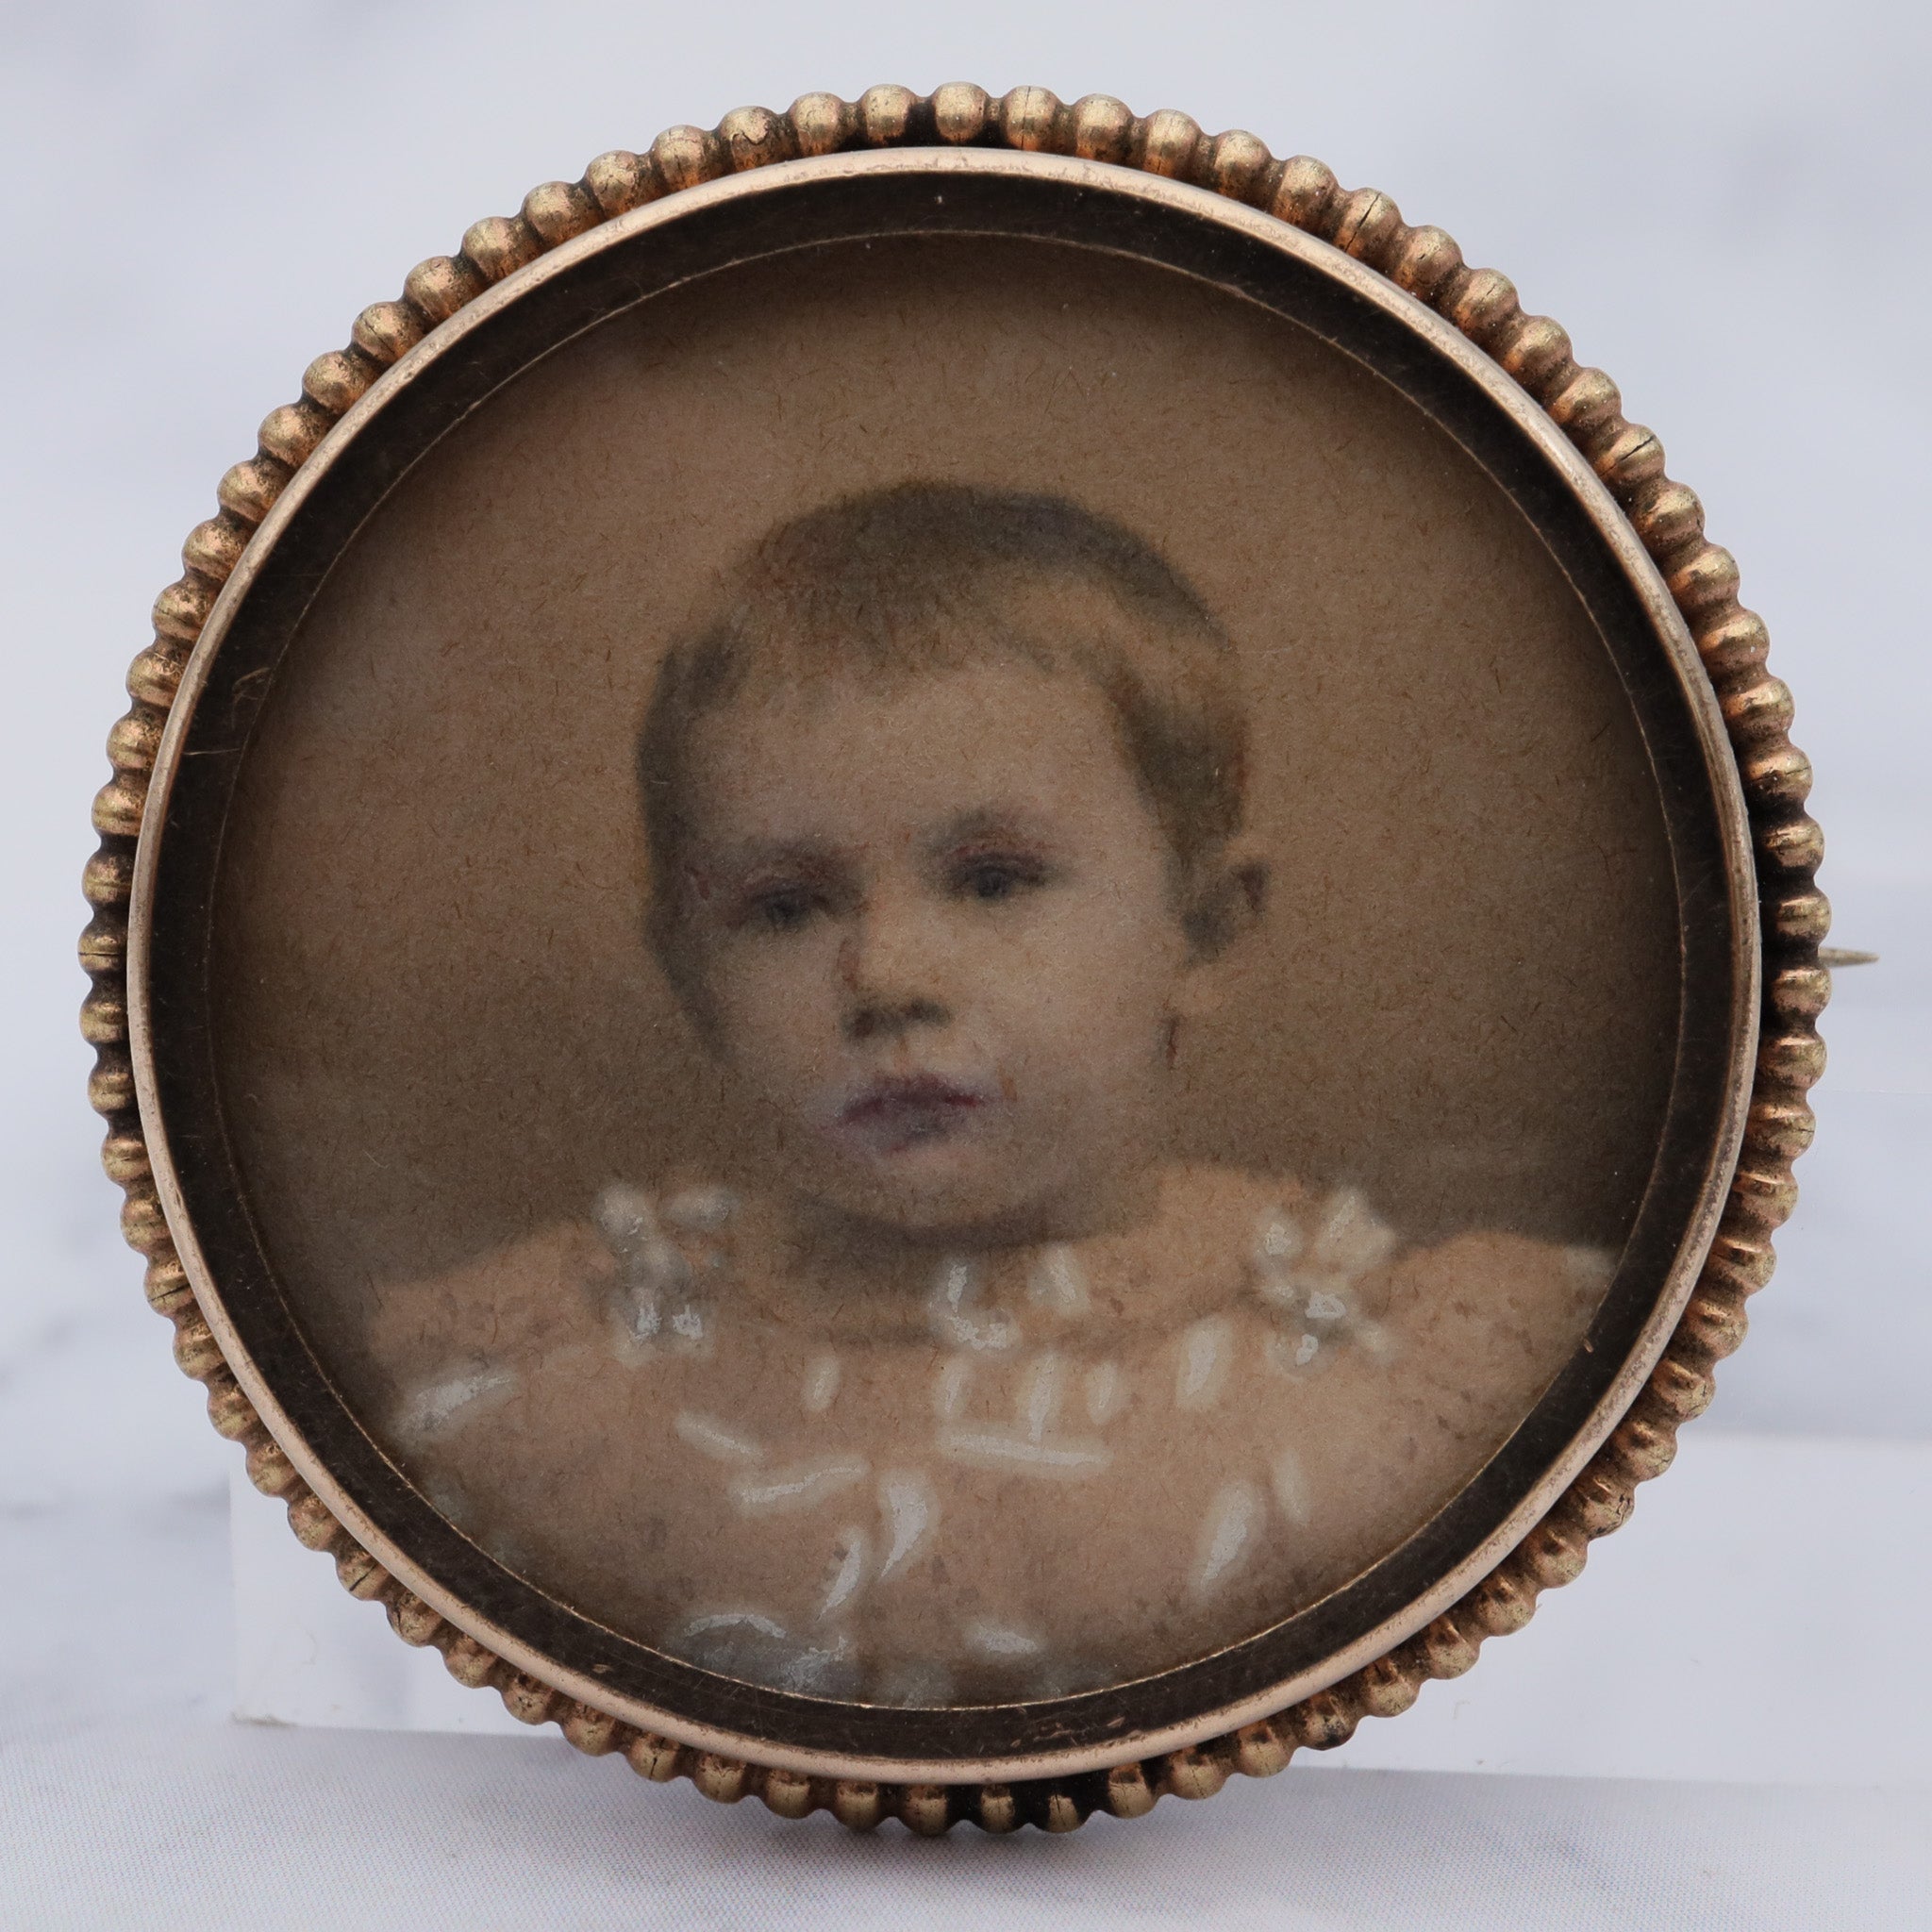 Antique Victorian gold-filled circle brooch with hand painted child’s portrait